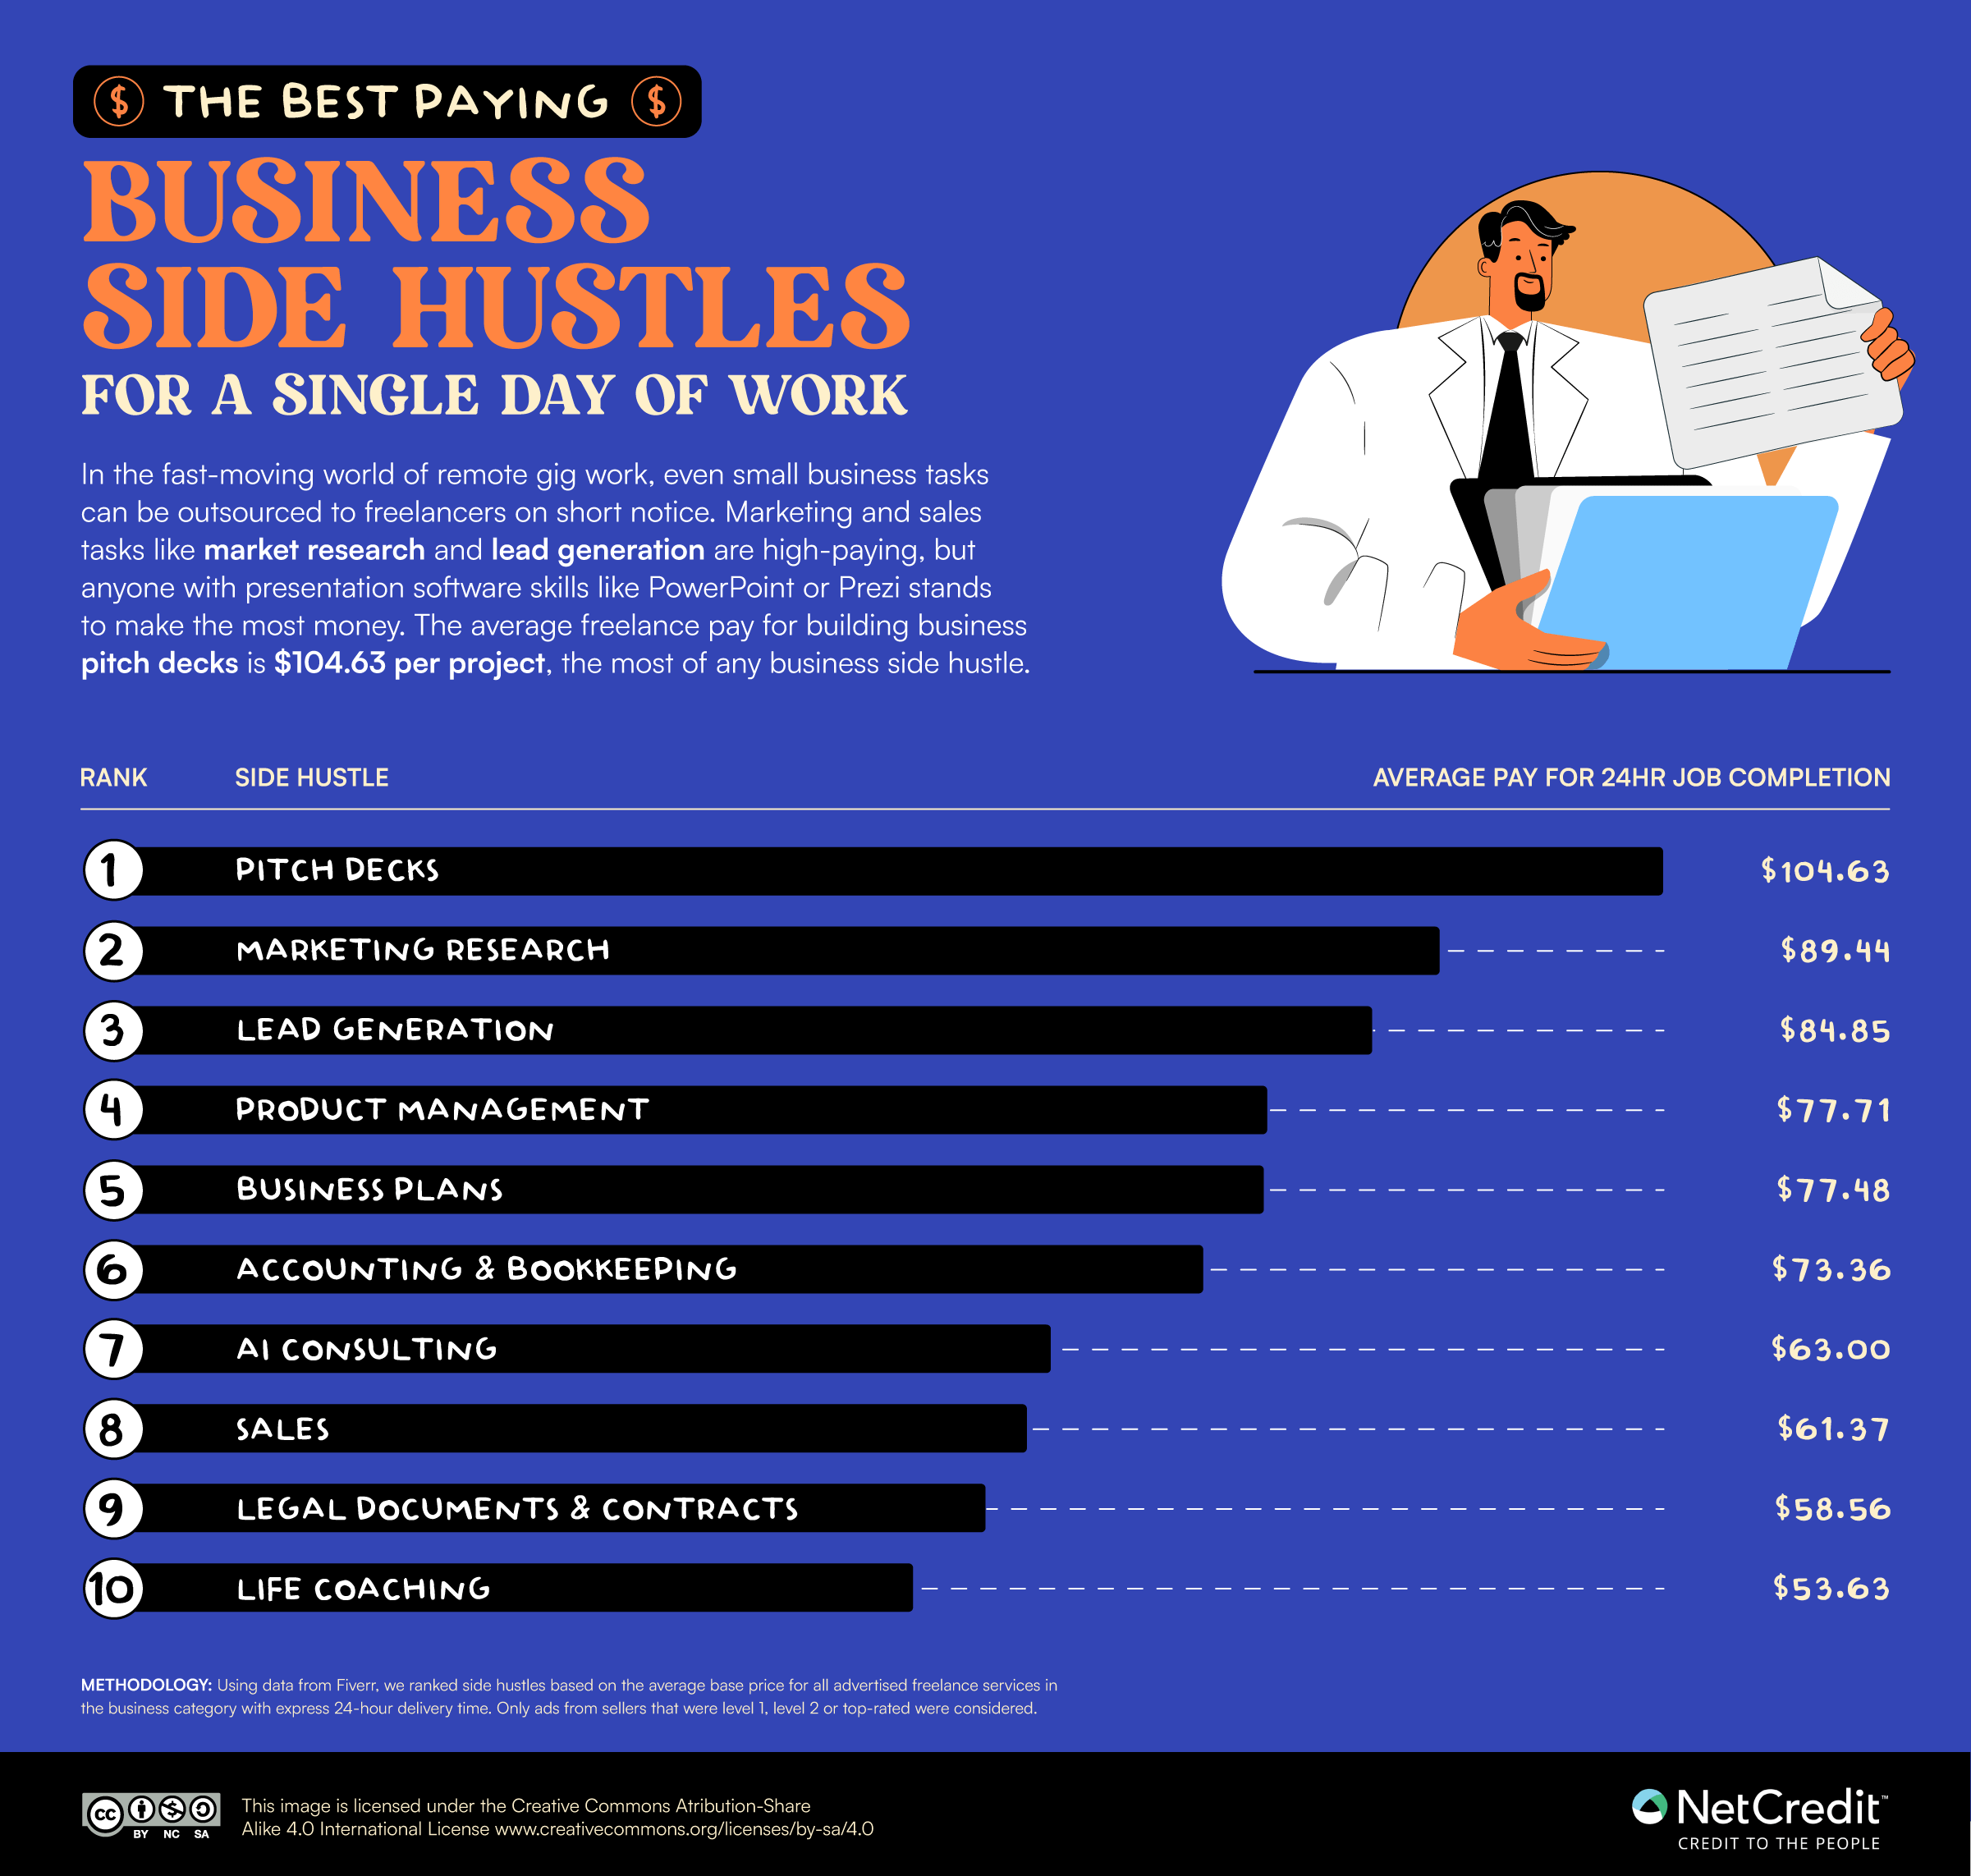 Ranking of the best paying business side hustles